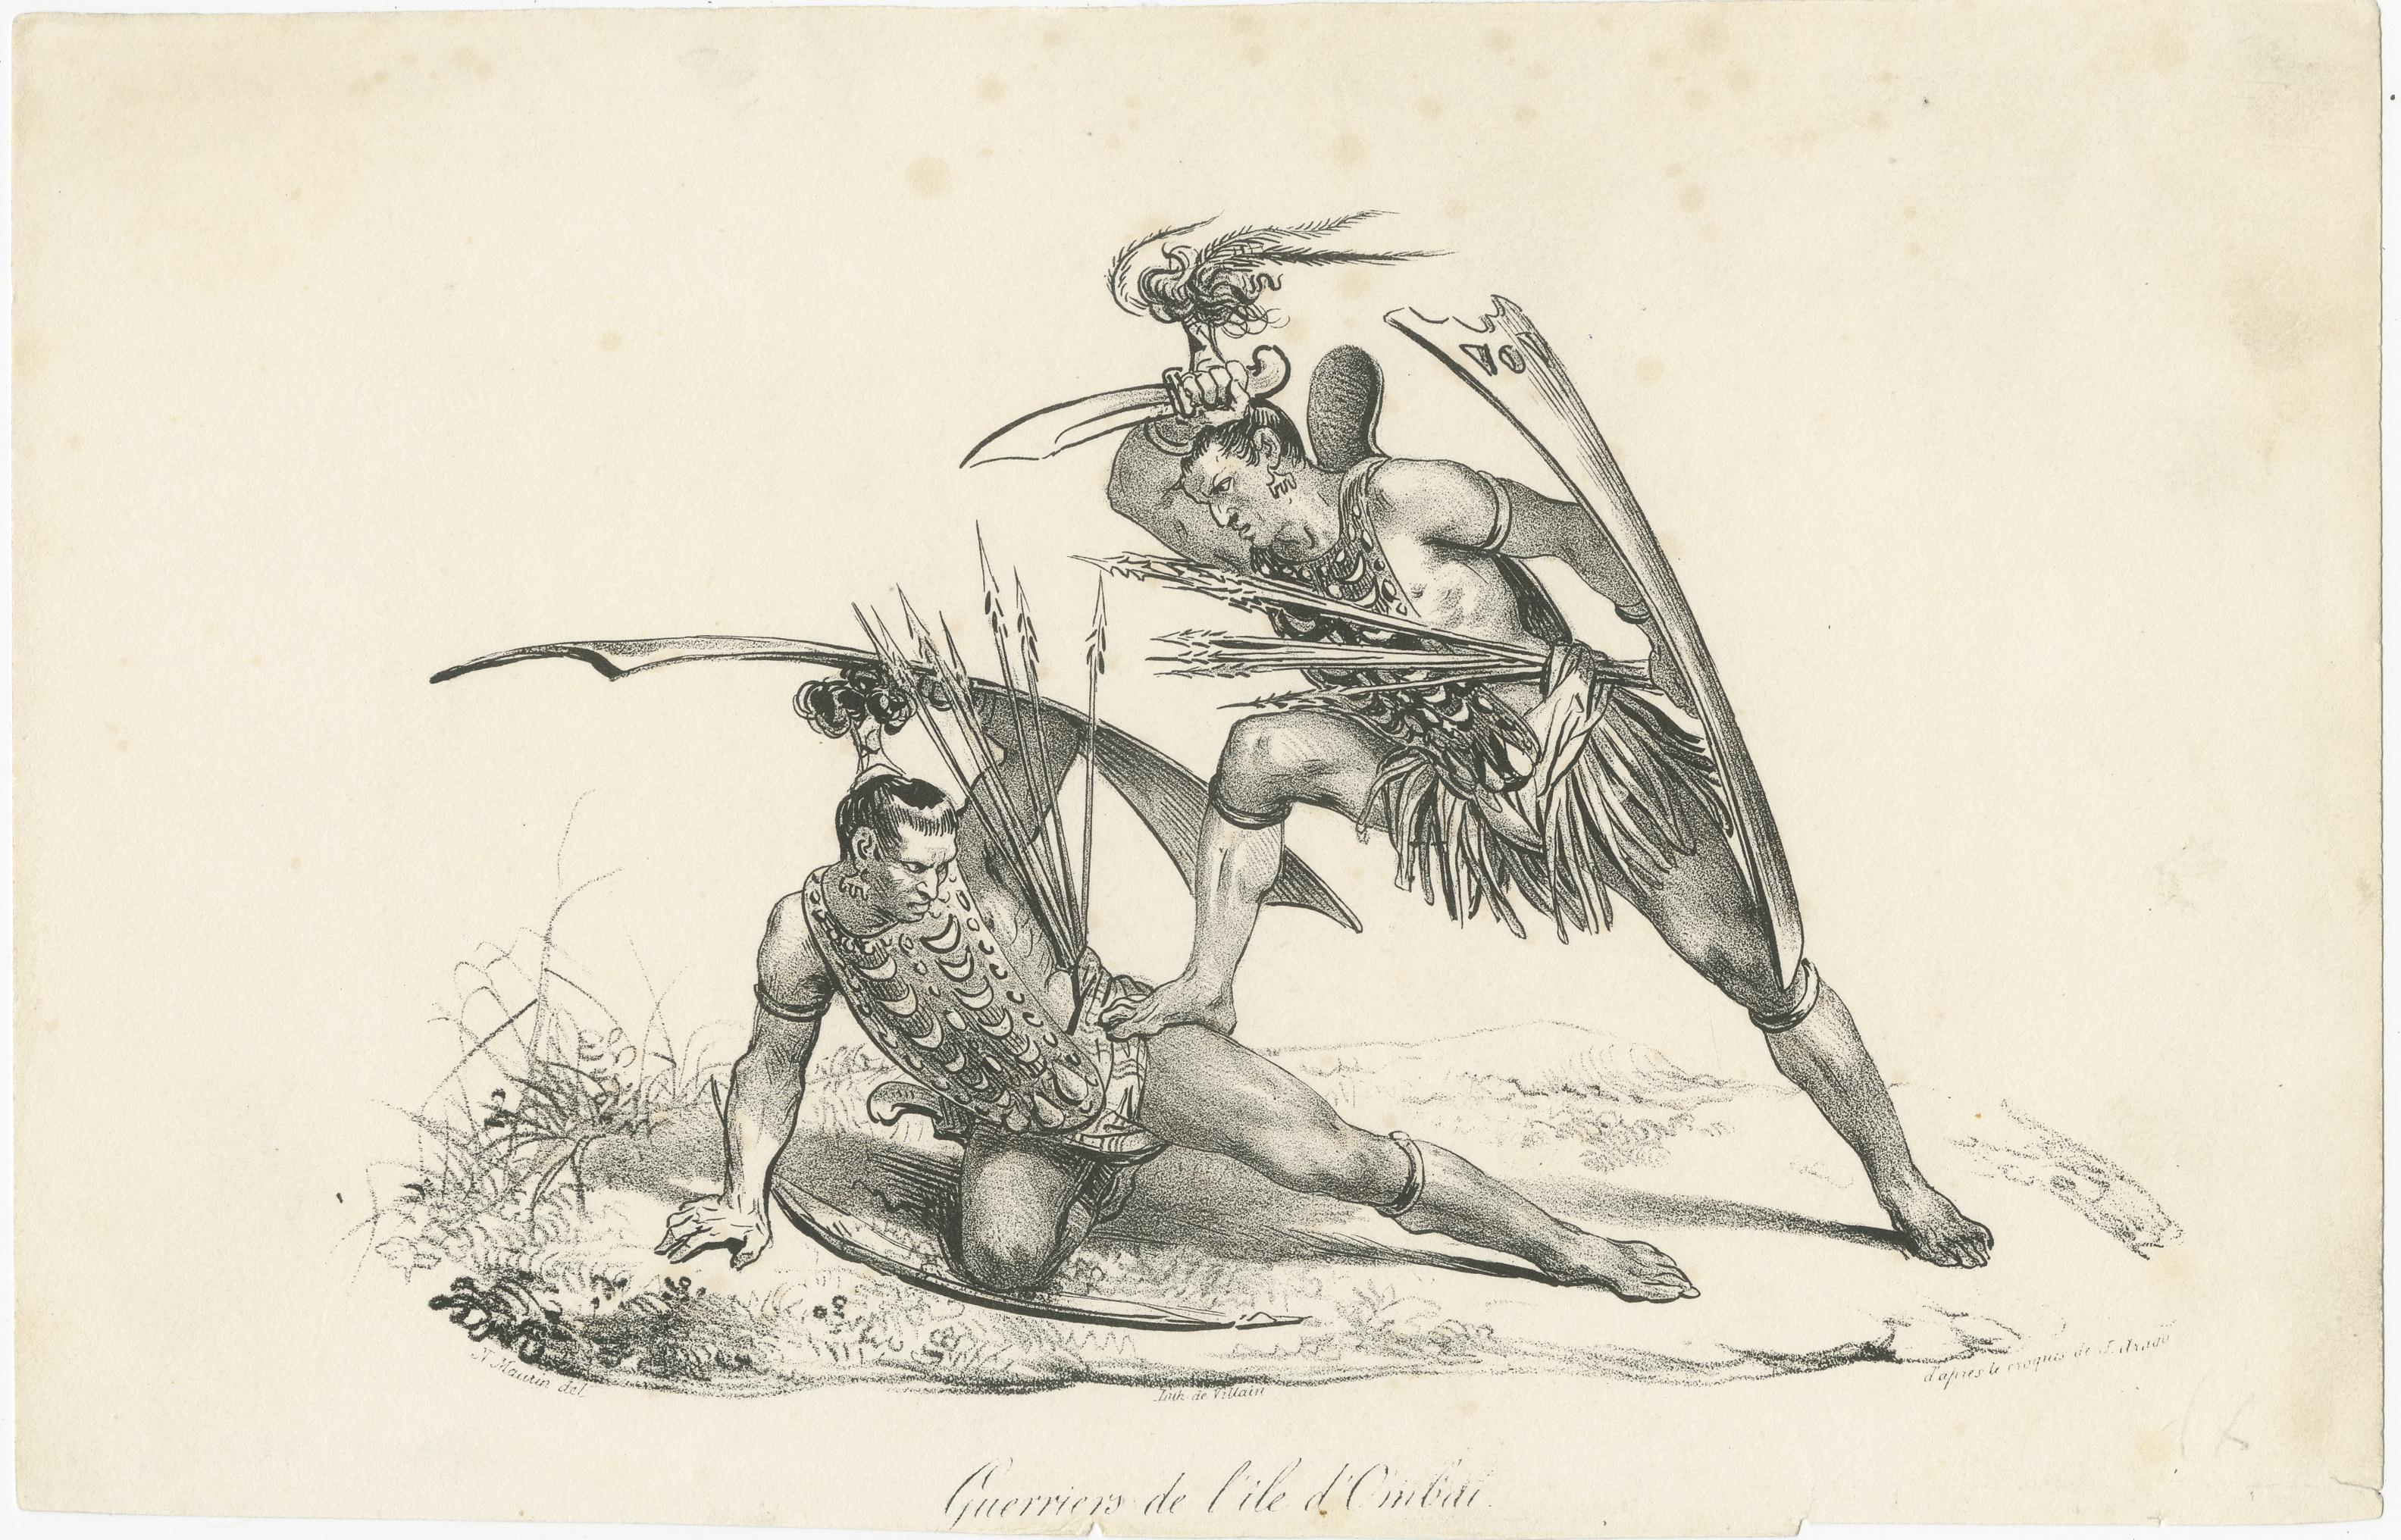 Antique print titled 'Guerriers de l'ile d'Ombai'. Two warriors of Ombai Island, Papua fighting. Ombai is an alternative name for the island of Alor. Plate to 'Souvenirs d'un aveugle (blind man)' by Jacques Etienne Victor Arago (1790 - 1855). A